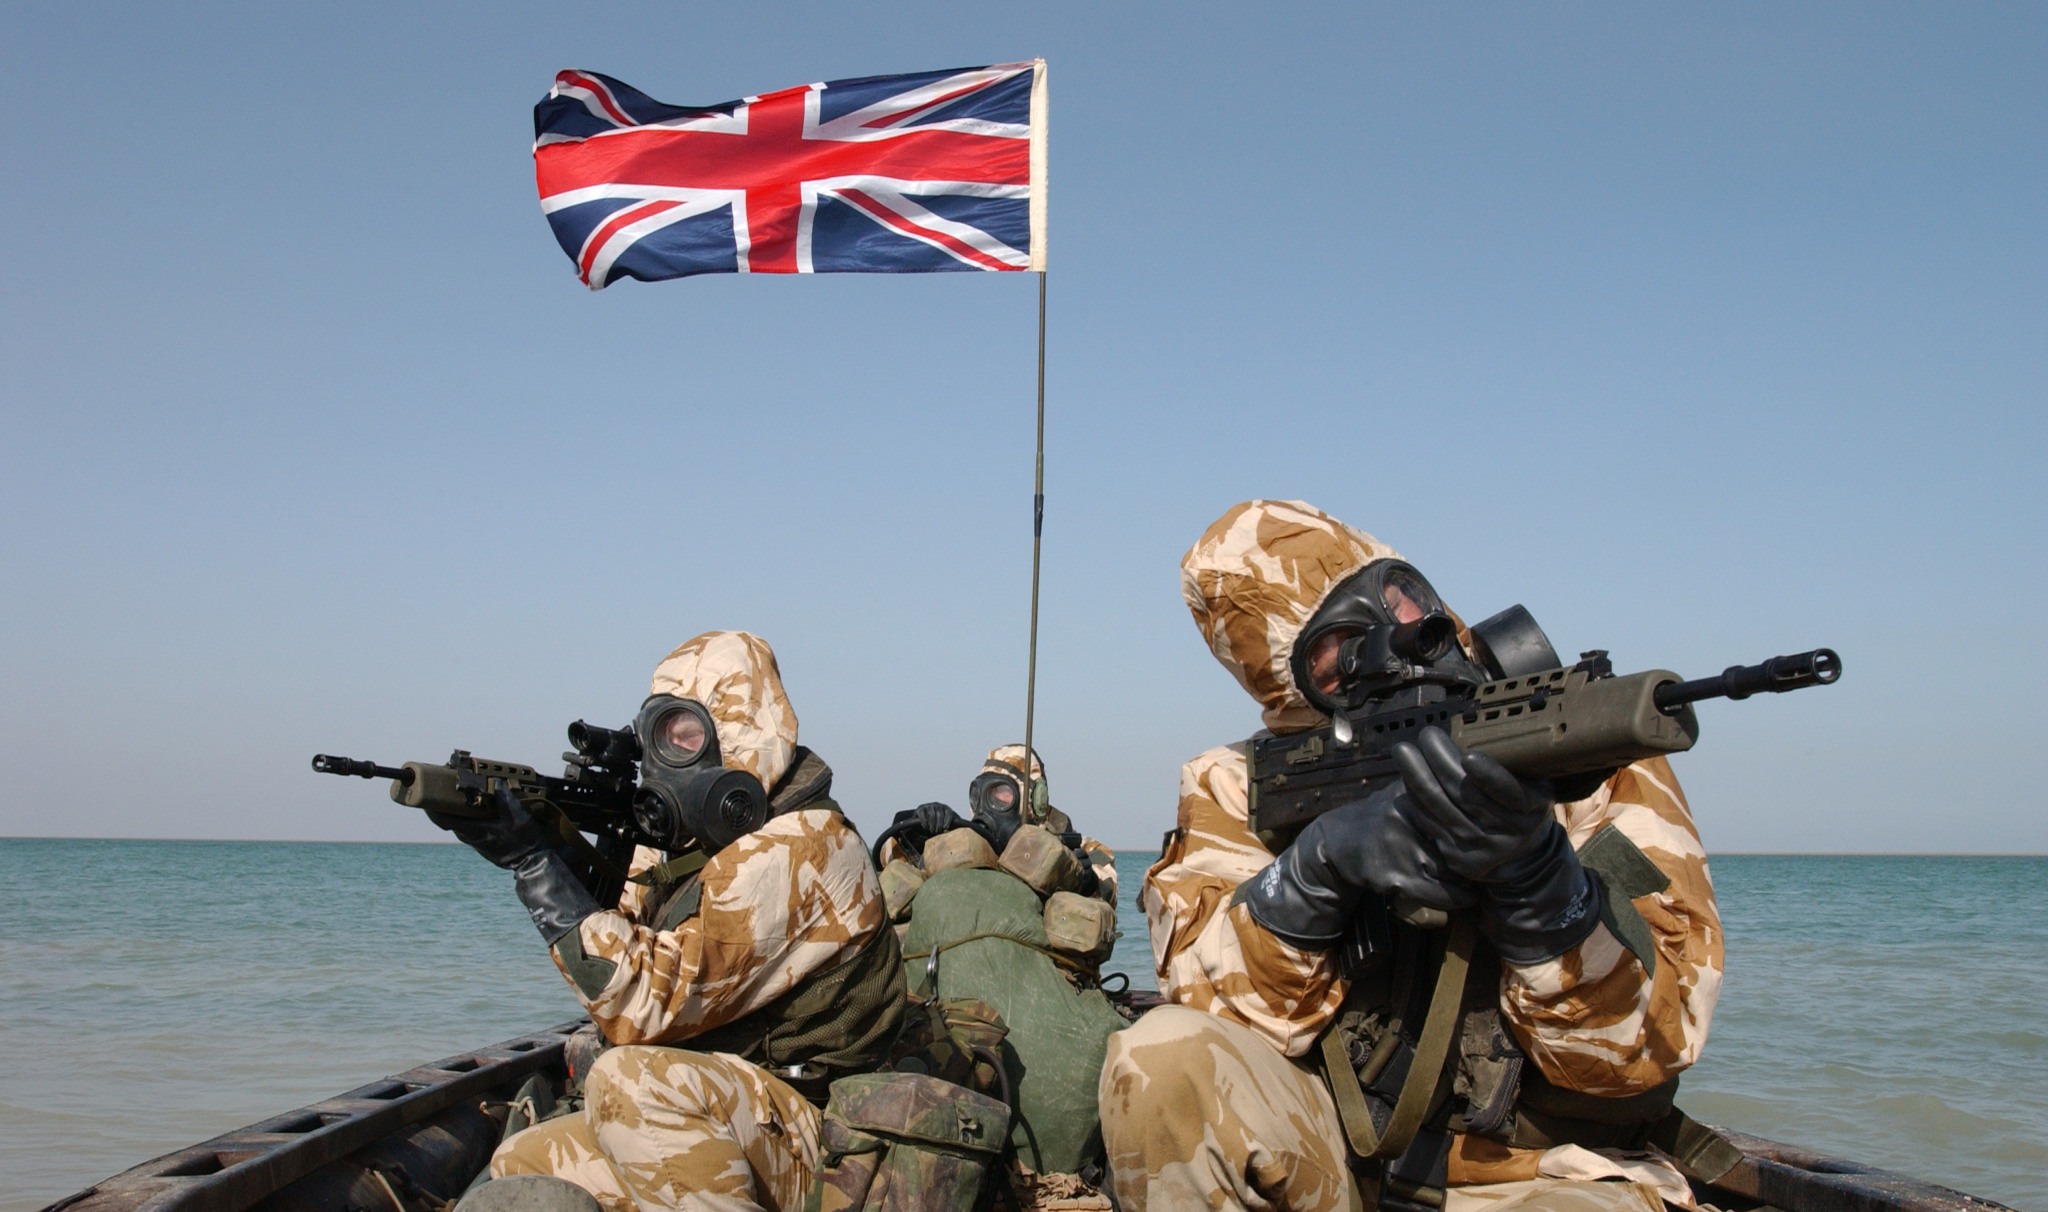 The UK’s 83 military interventions around the world since 1945